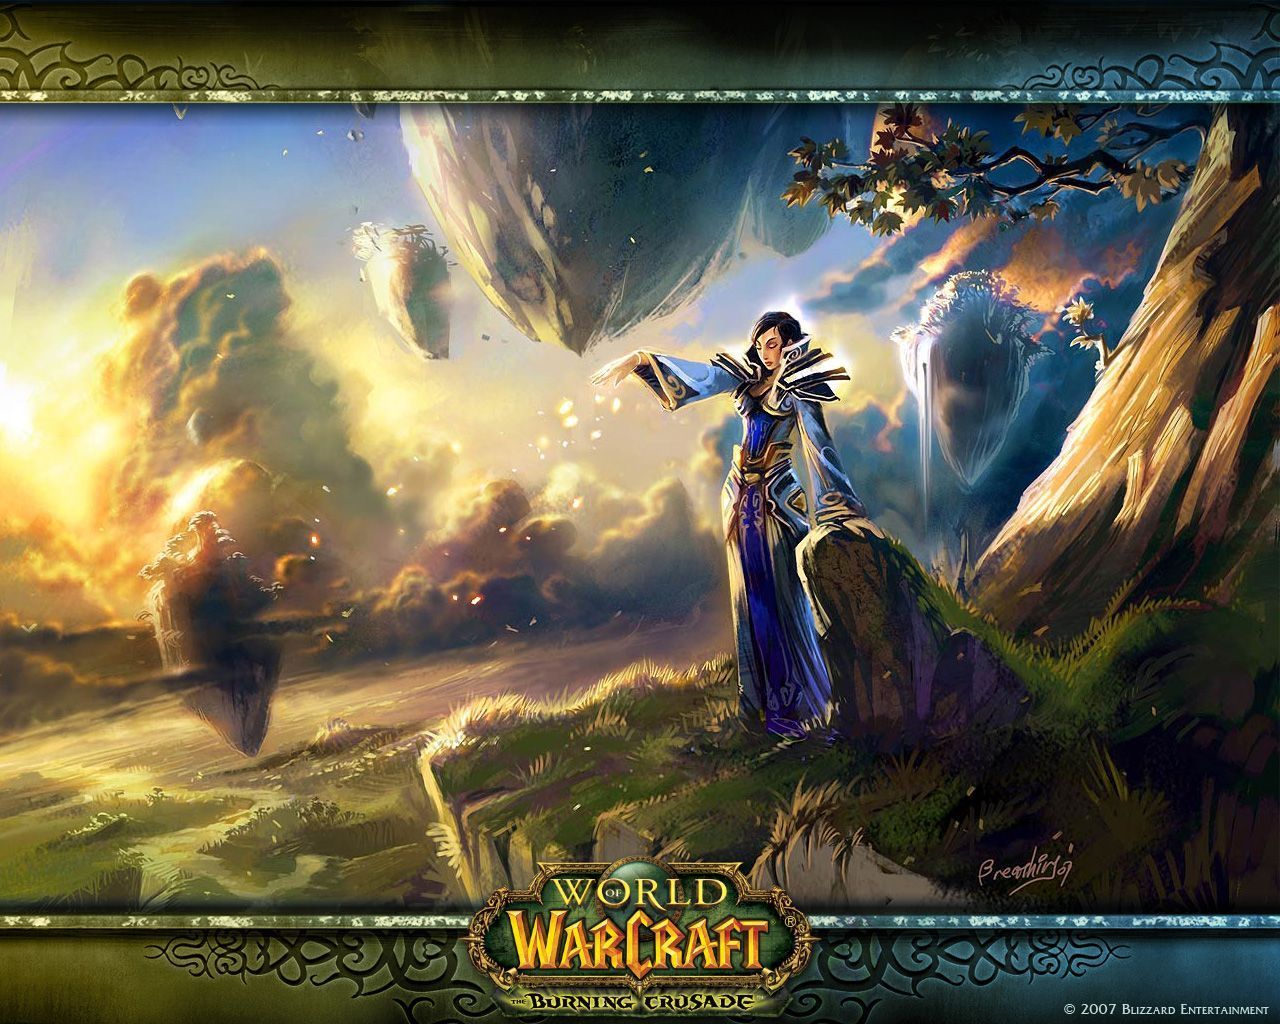 Top 1280x1024 World Of Warcraft Images for Pinterest